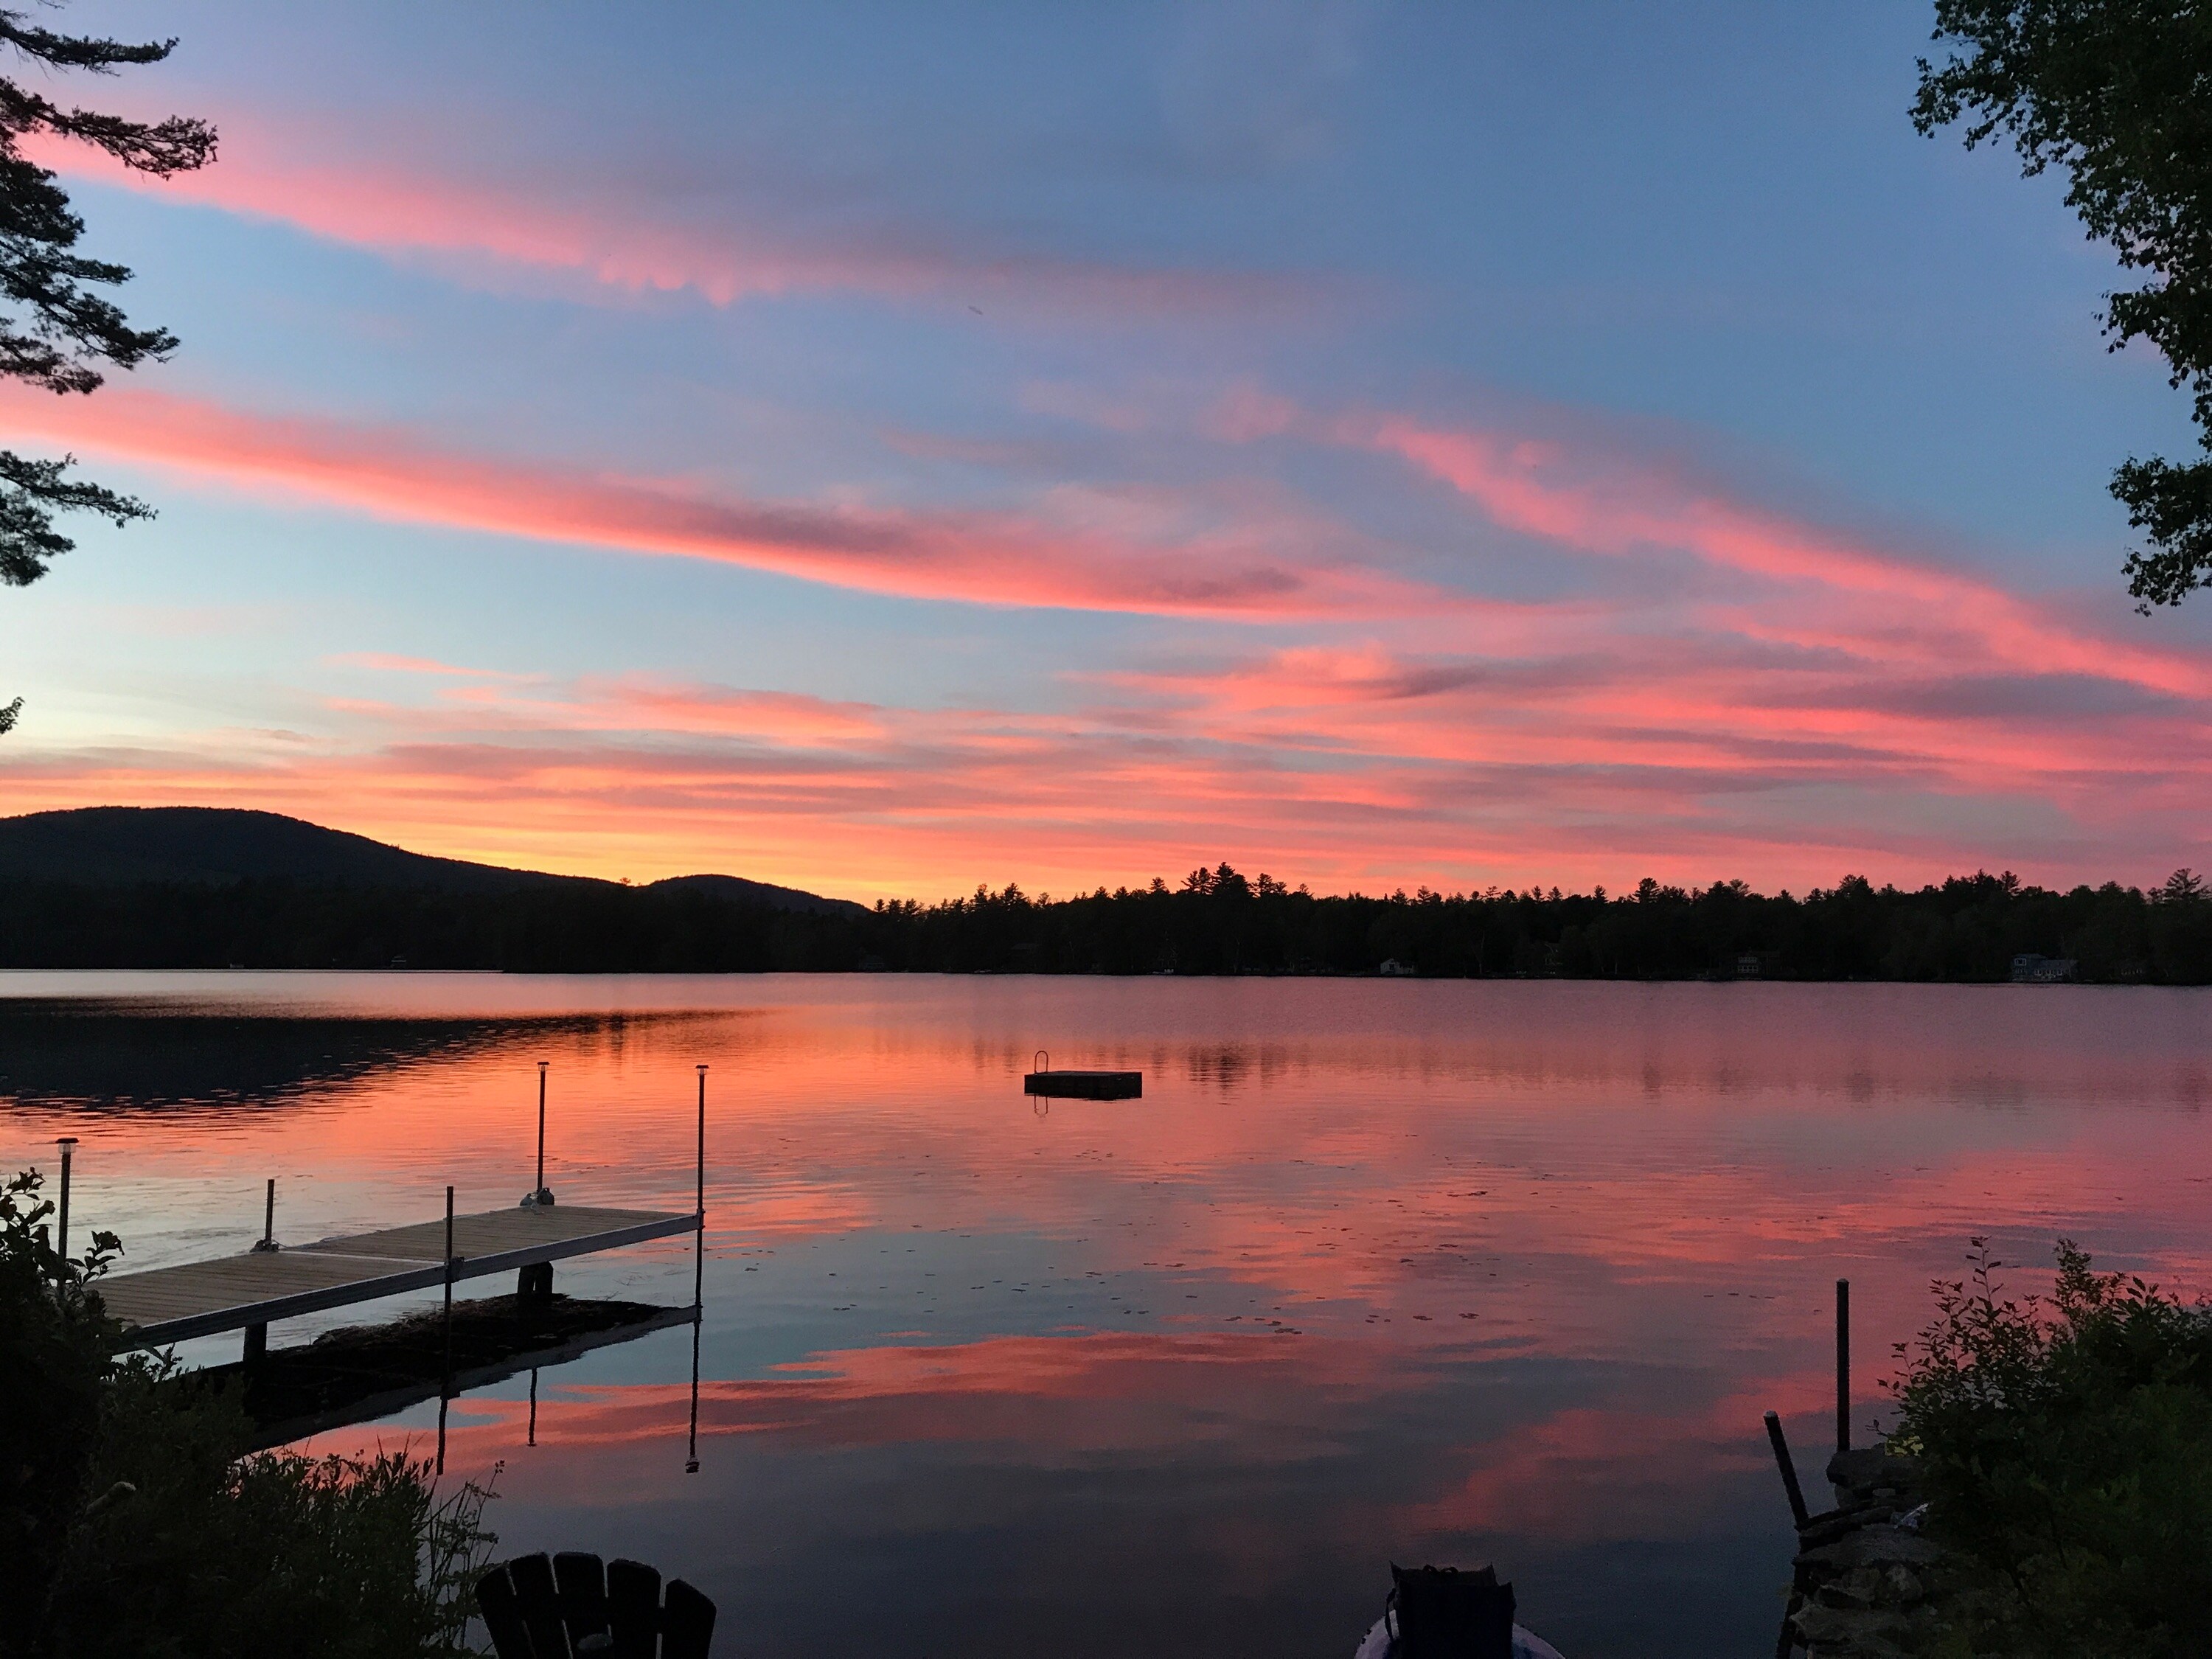 Property Image 2 - 91WR Lake vibes, amazing views at this beautiful waterfront home in the the White Mountains! Rest, relax o